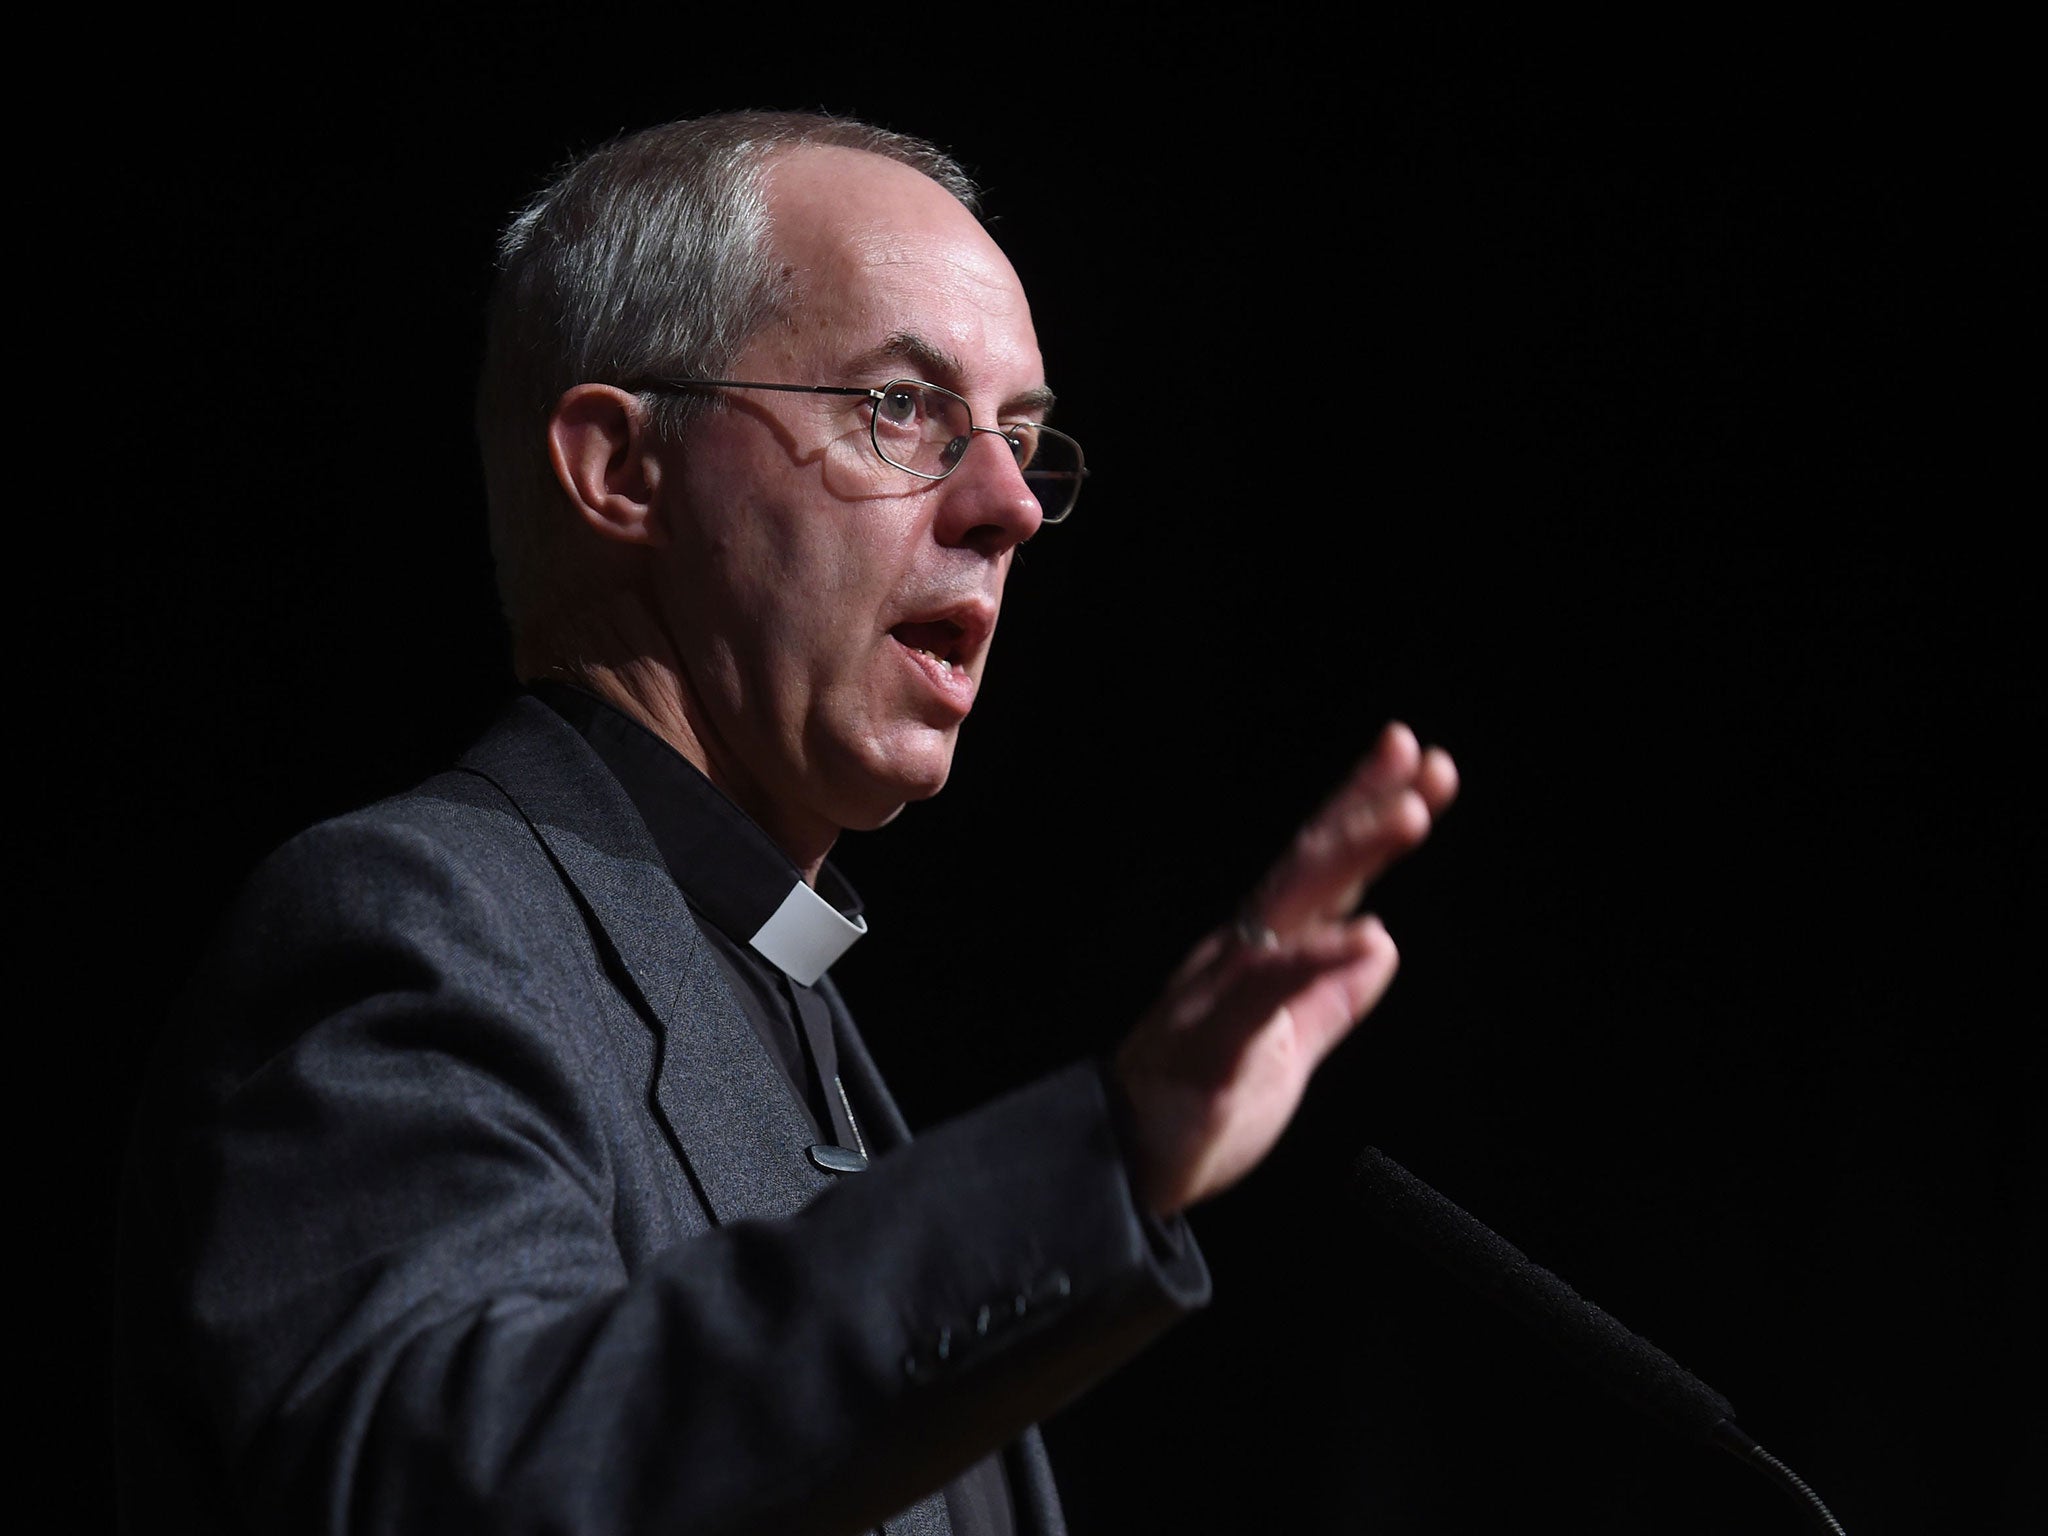 The Archbishop of Canterbury the Most Reverend Justin Welby has warned the UK will cross a 'legal and ethical Rubicon' if Parliament votes to let terminally ill patients end their lives